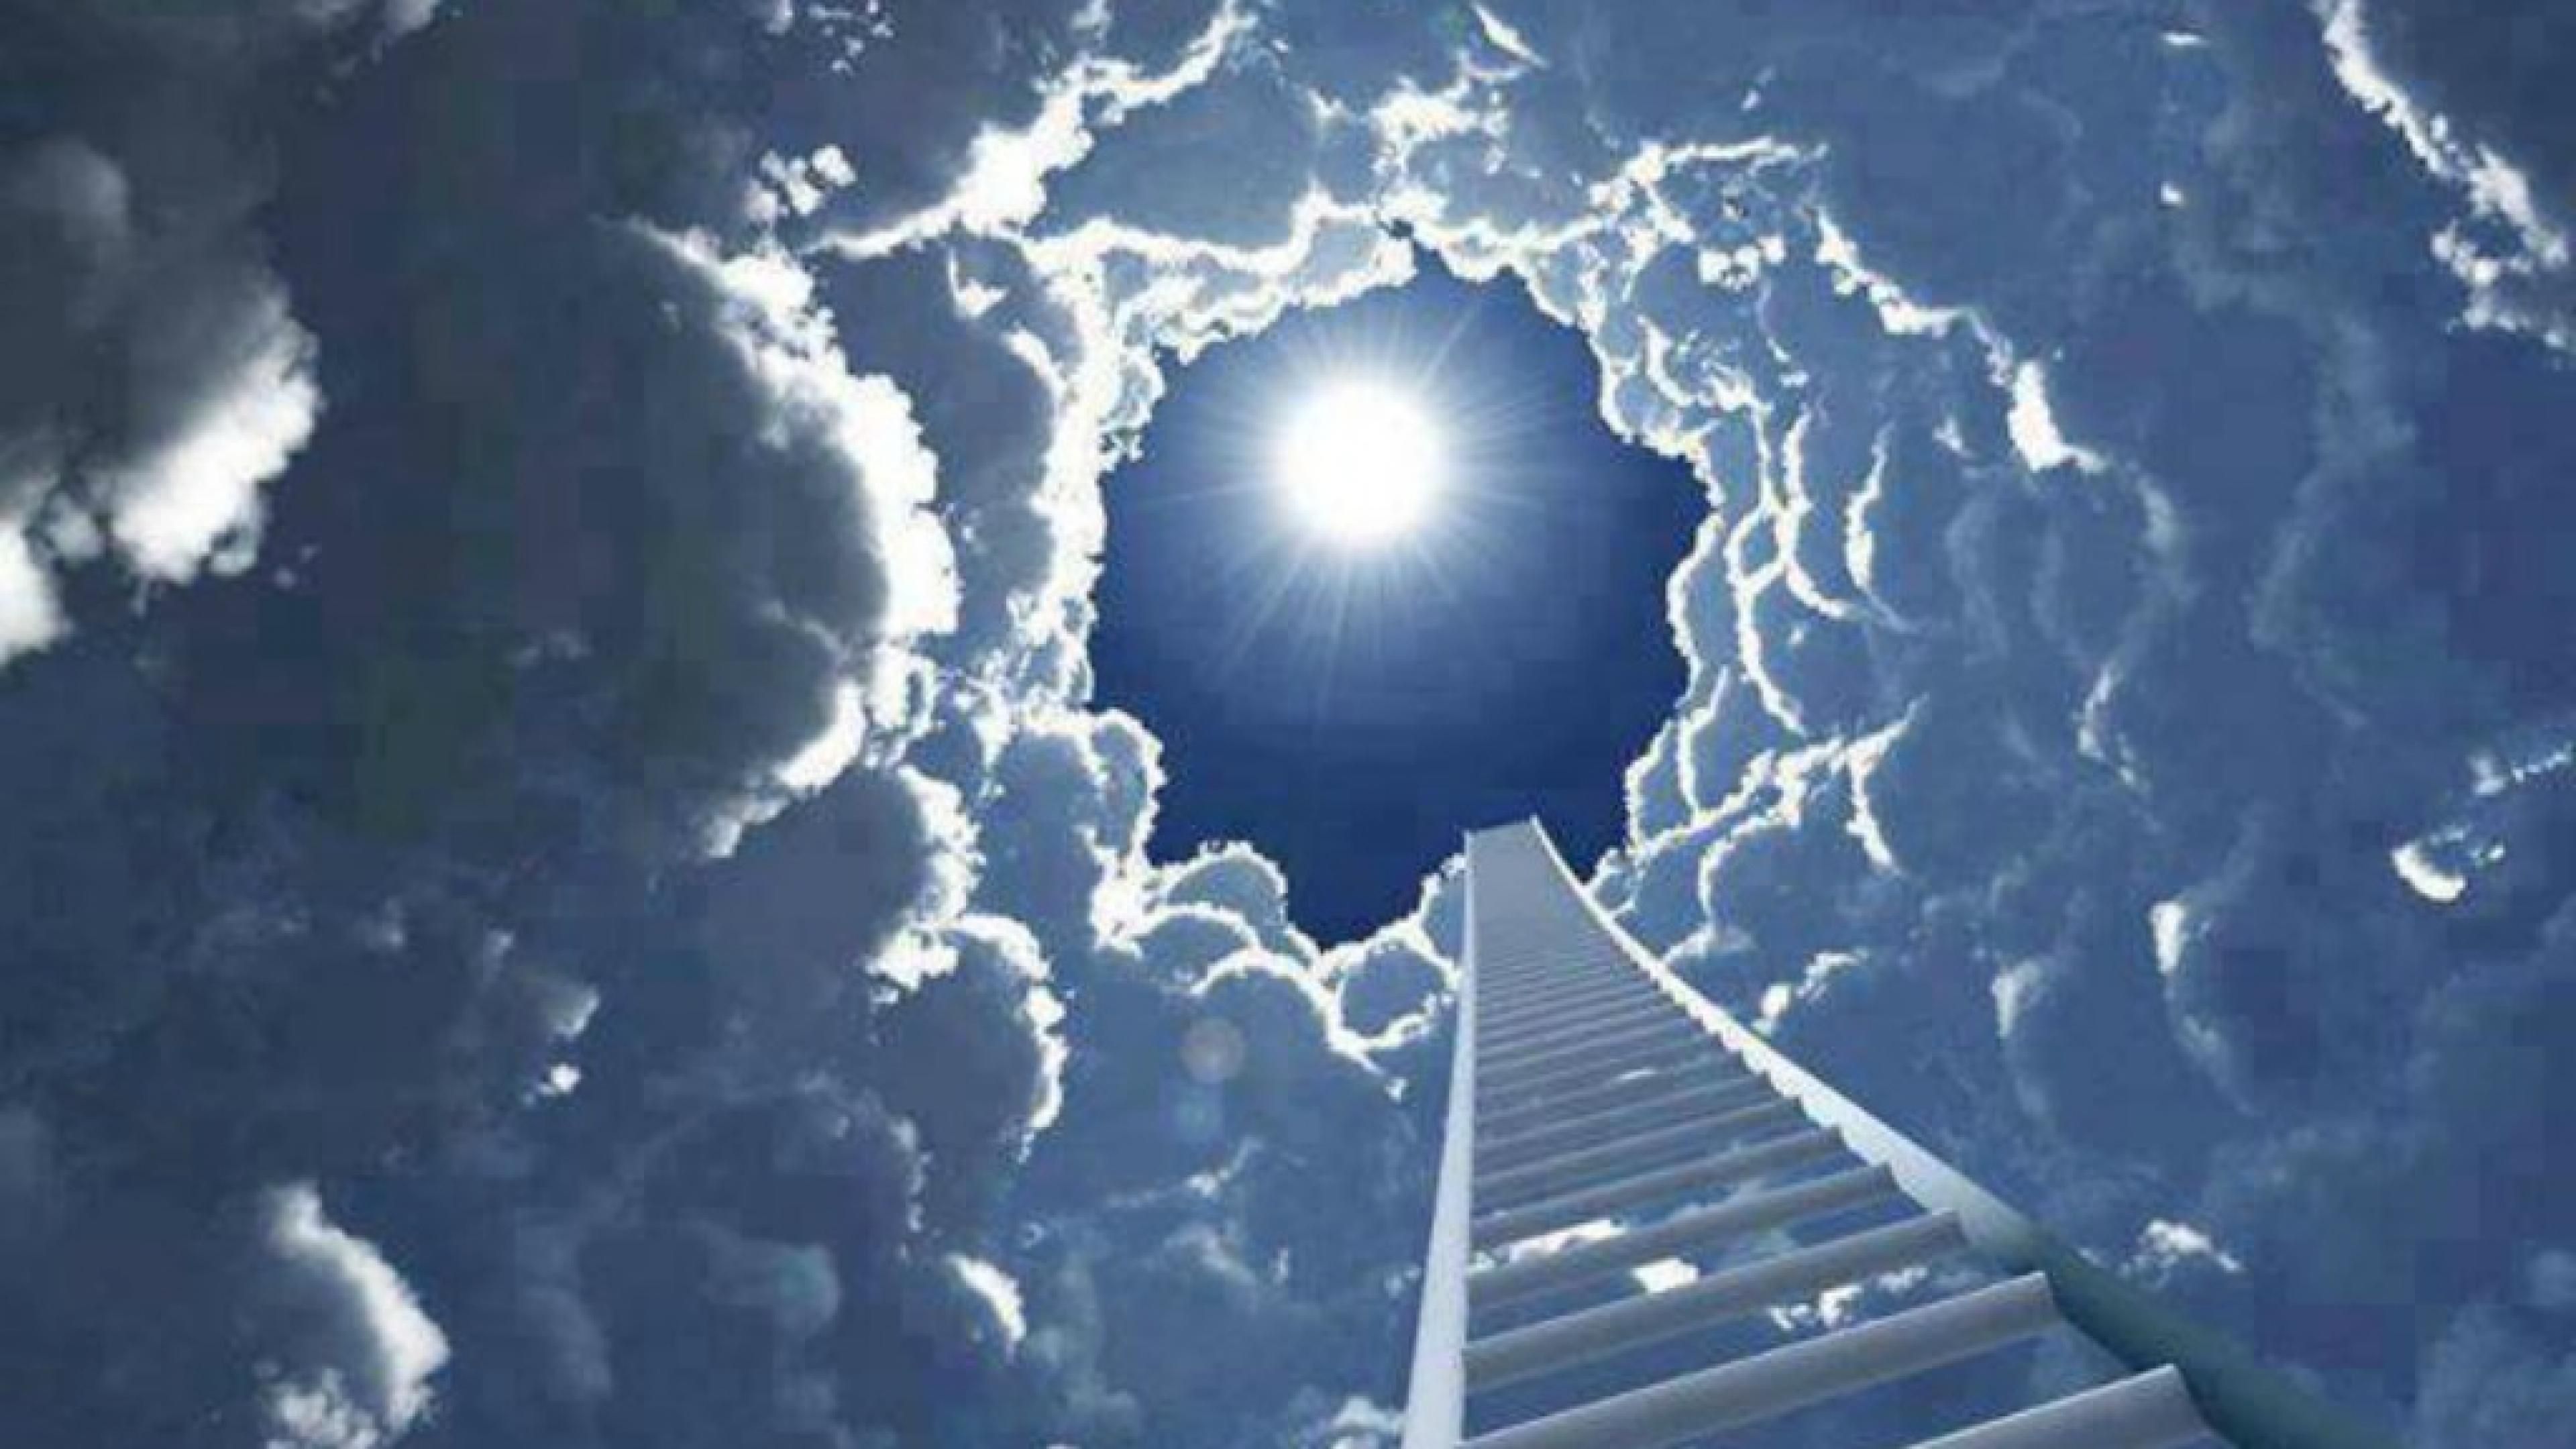 The Stairway To Heaven Photos For Desktop Background Best